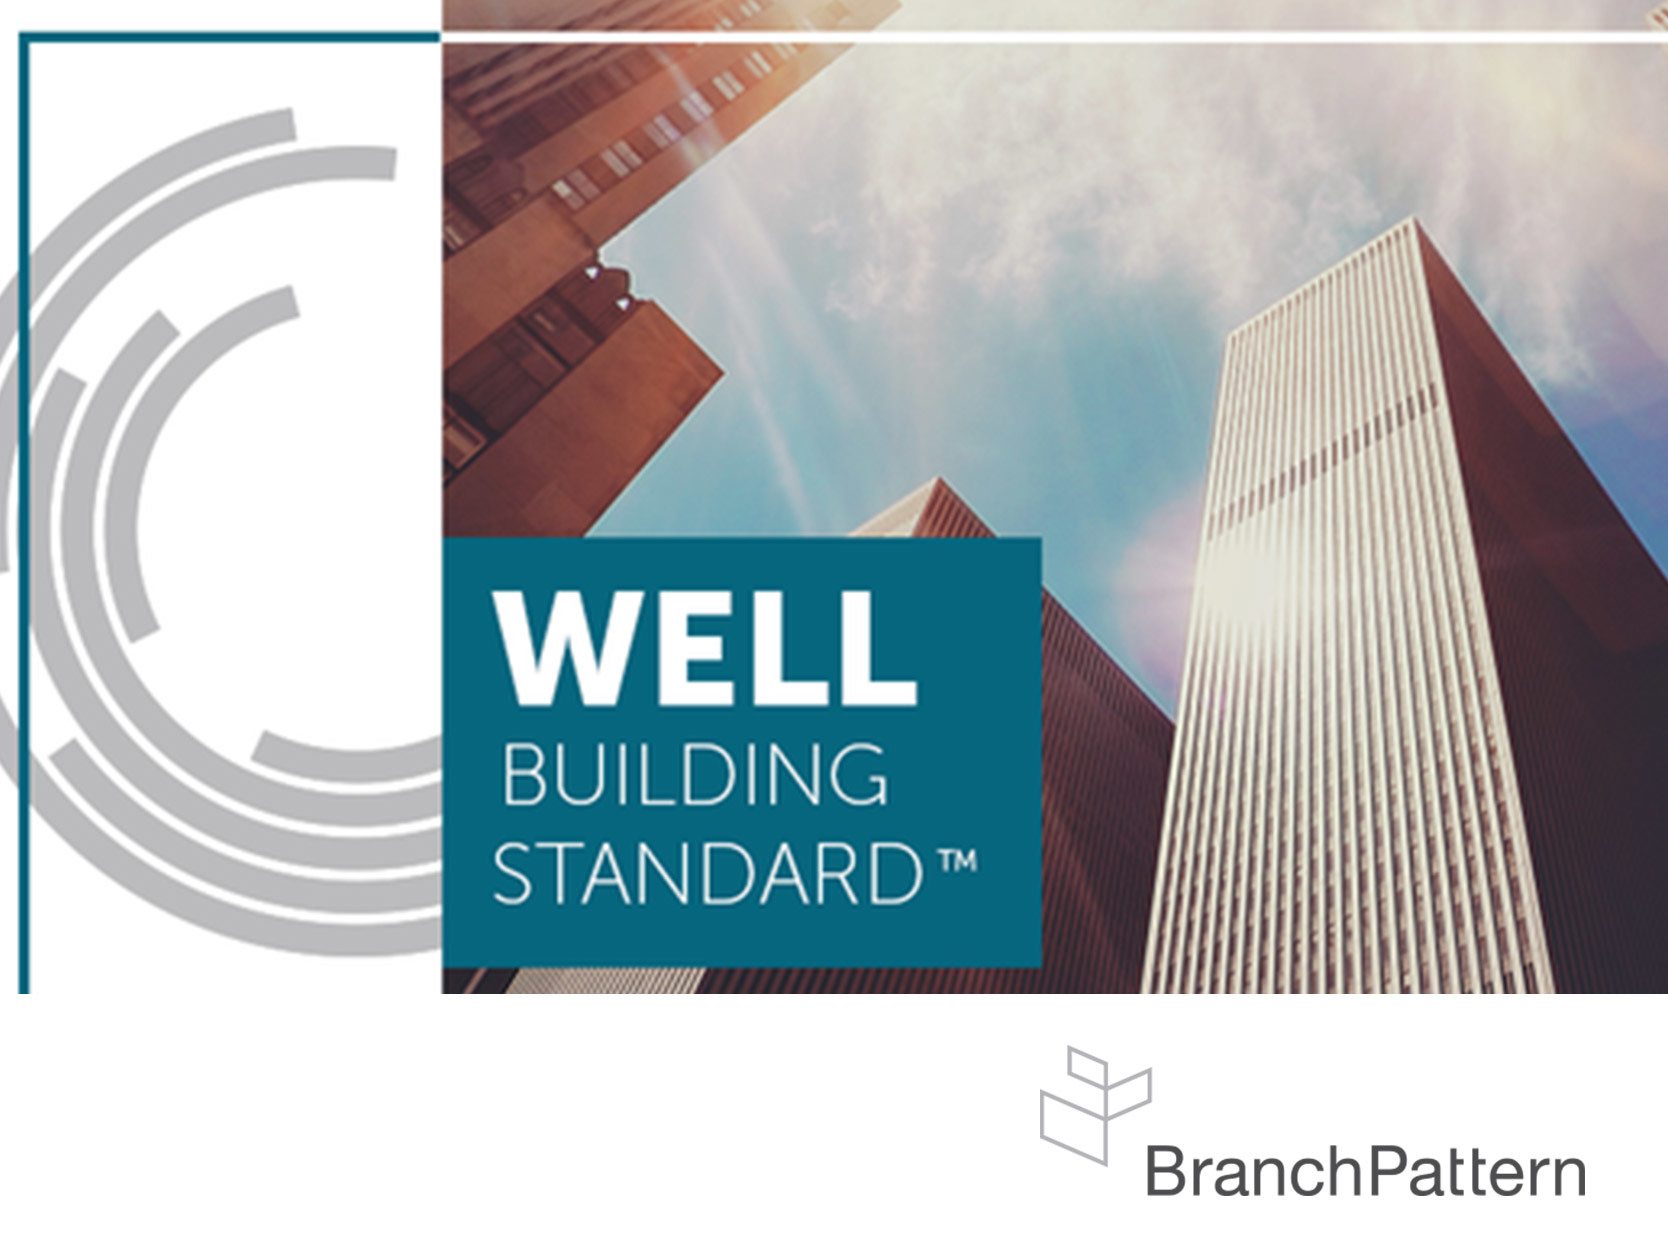 Introducing the WELL Building Standard